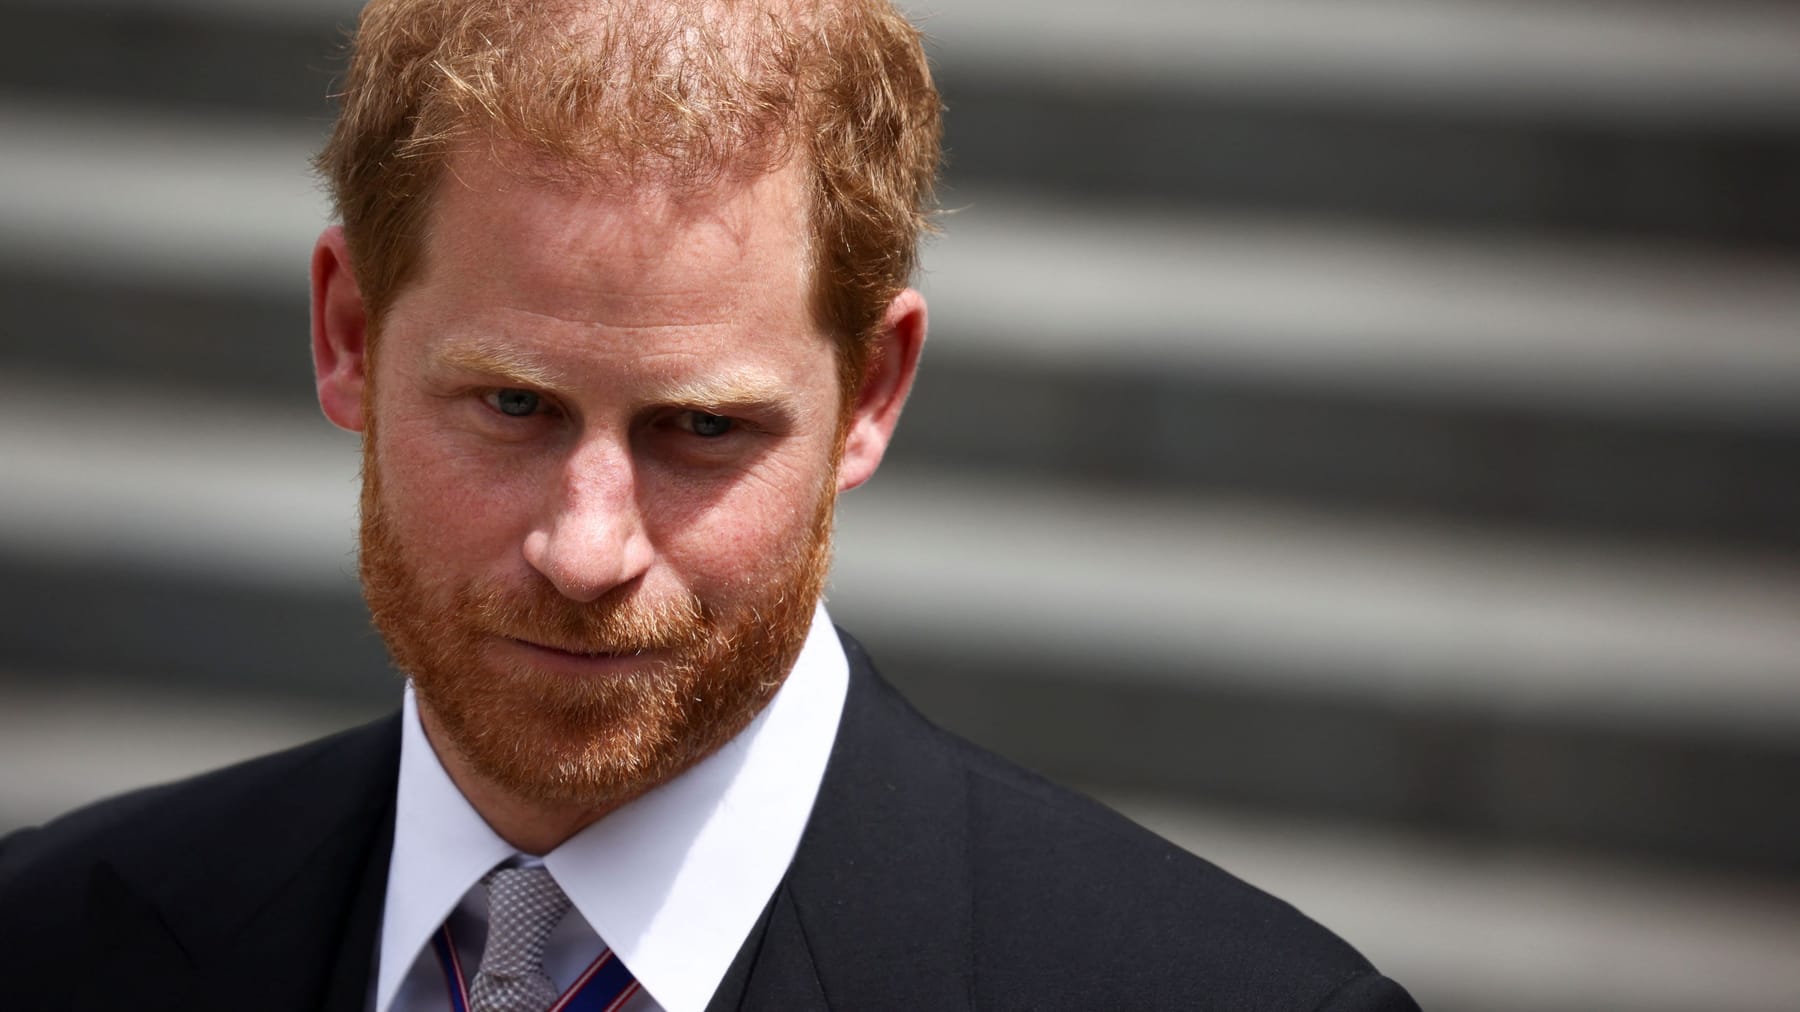 Prince Harry is facing his next bankruptcy in court